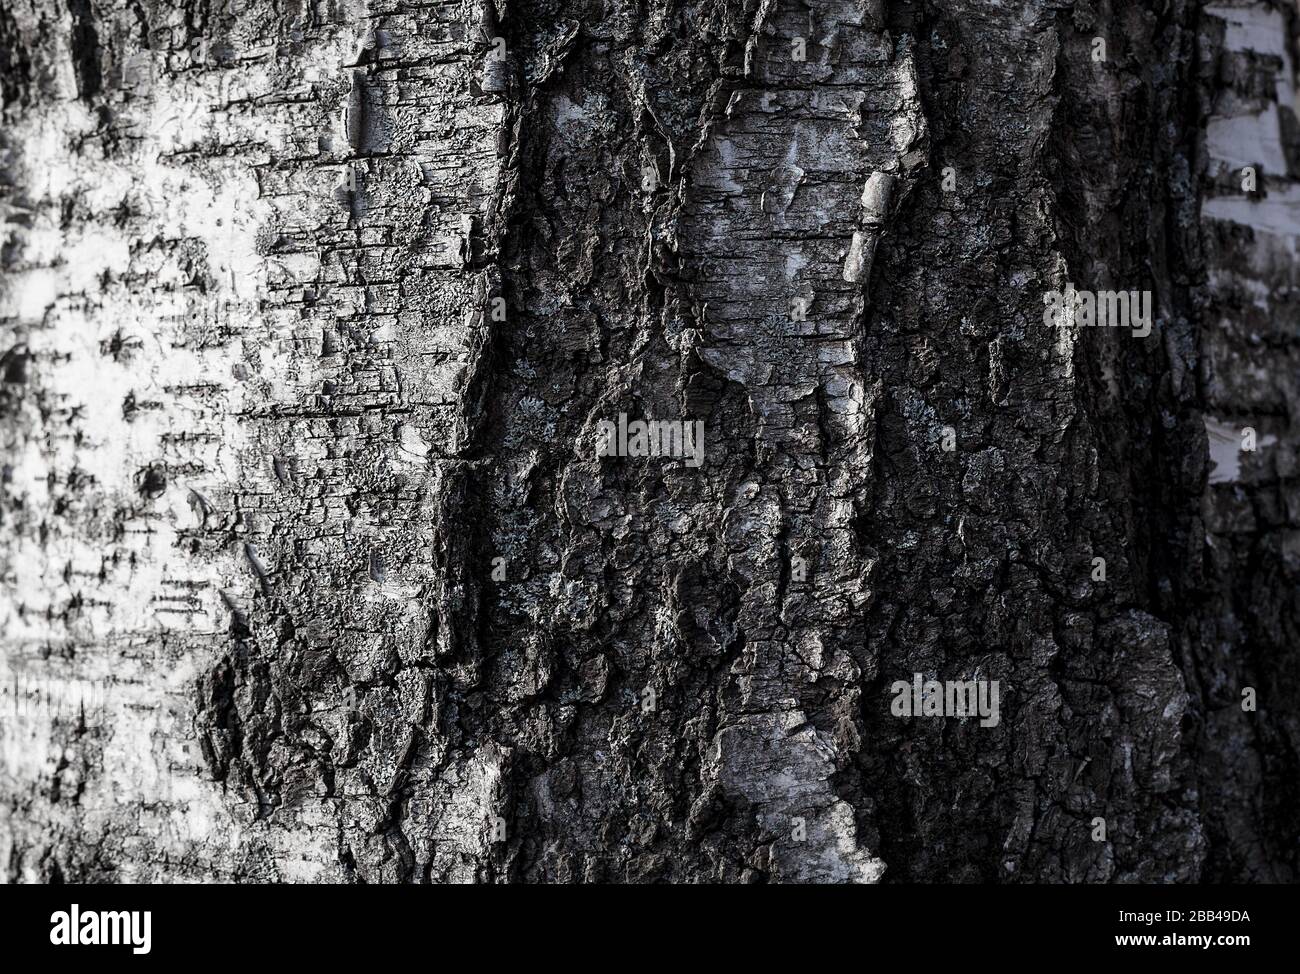 Monochrome birch tree bark texture. Bark close up. Abstract natural black and white background. Stock Photo